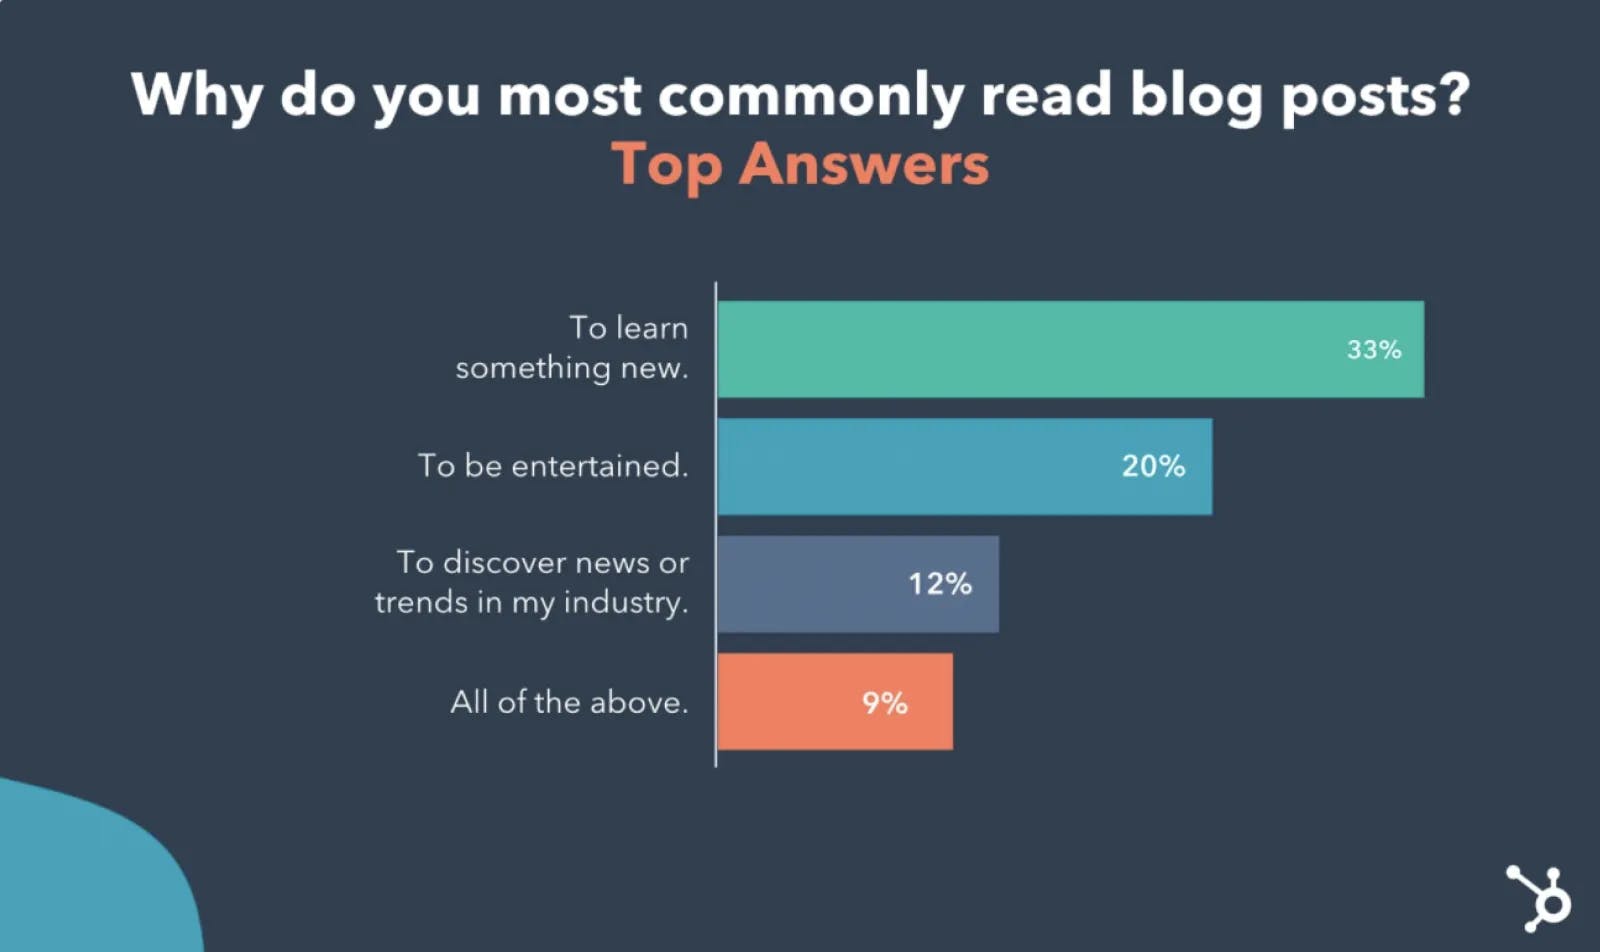 Why do you most commonly read blog posts?